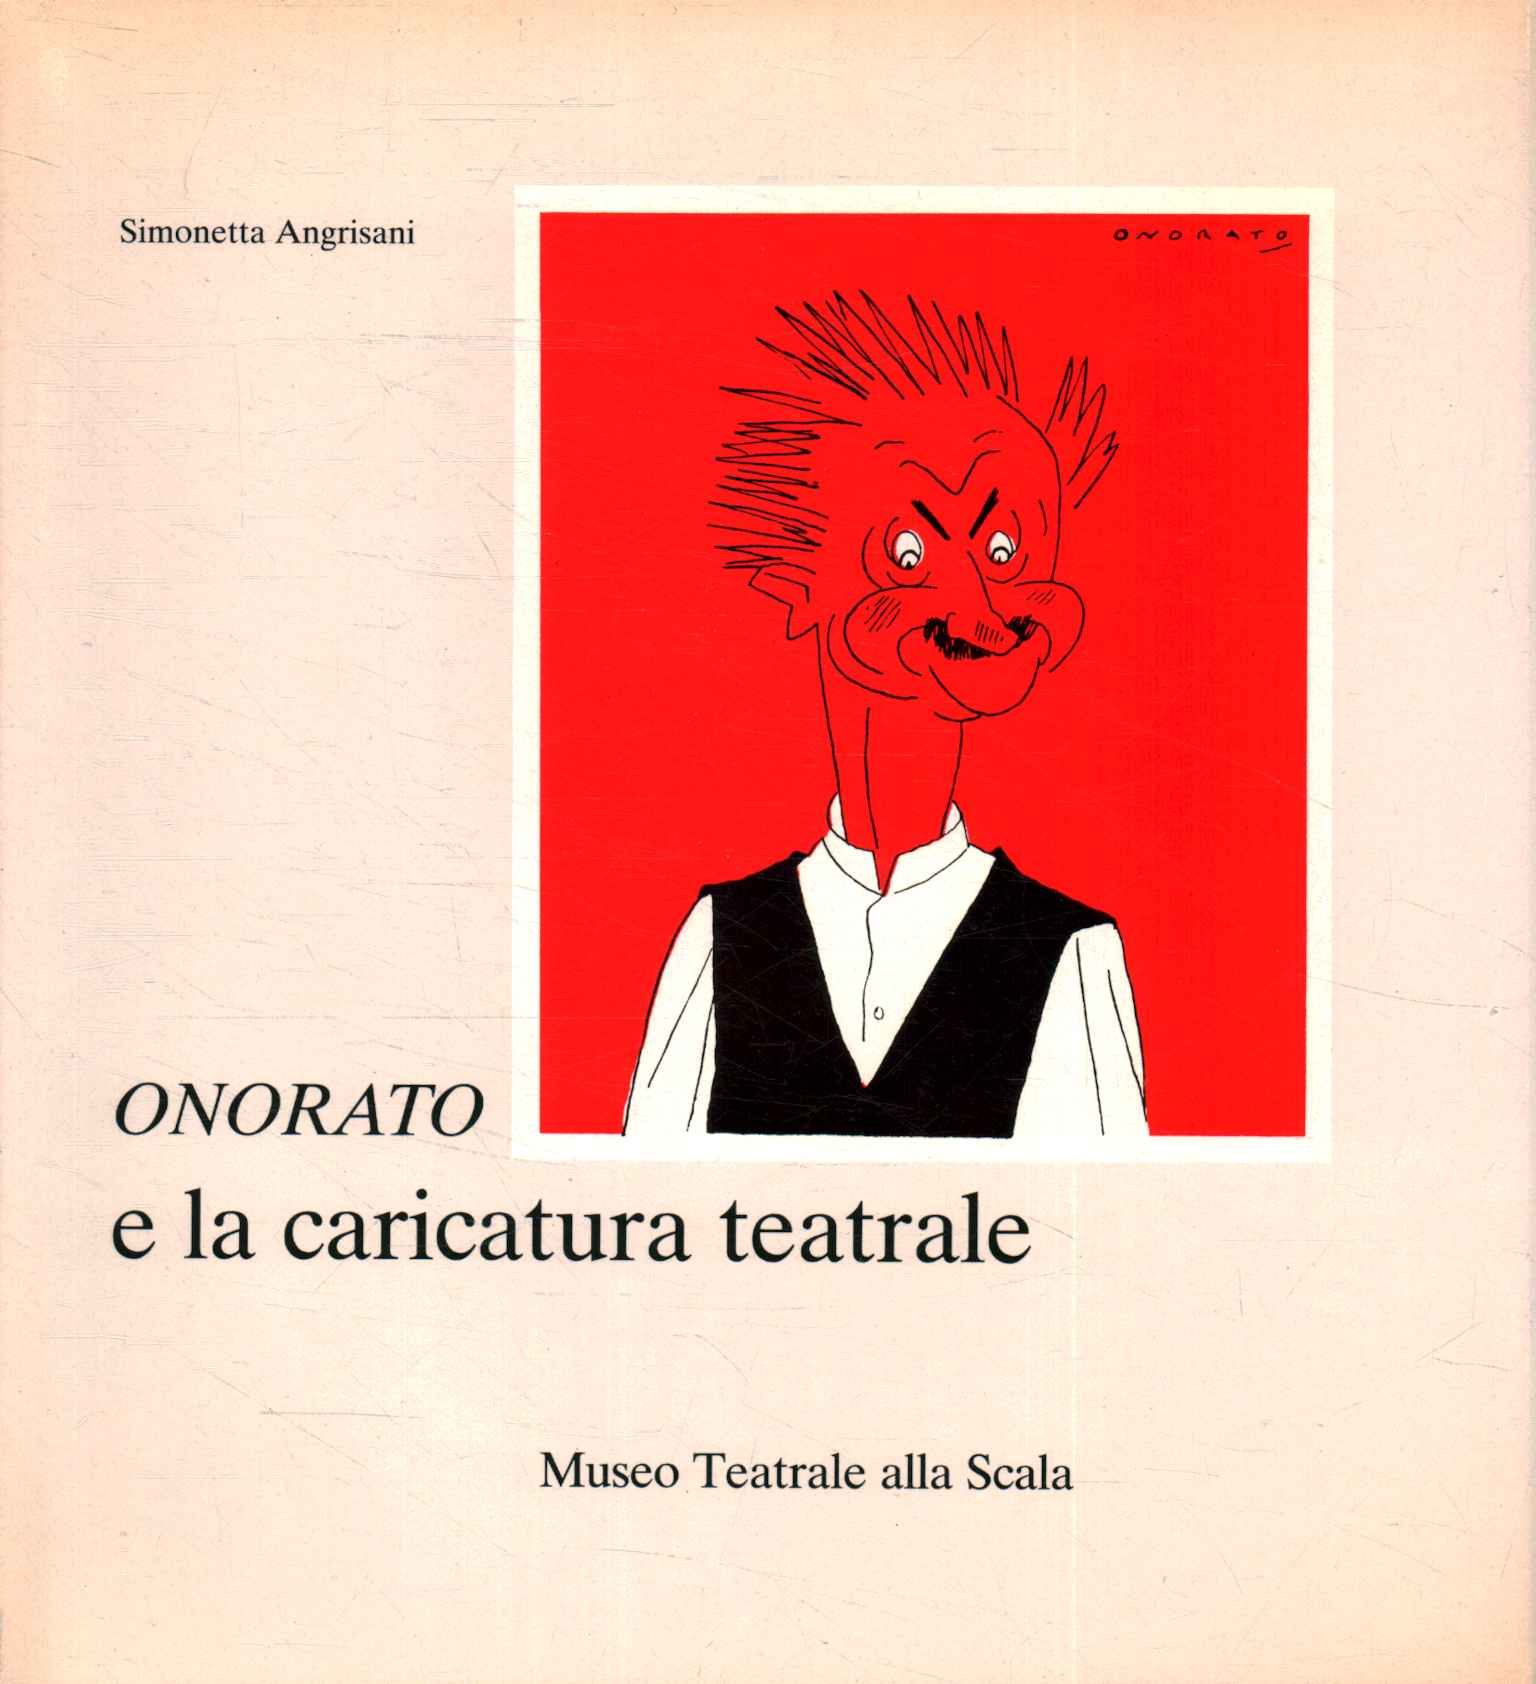 Onorato and the theatrical caricature